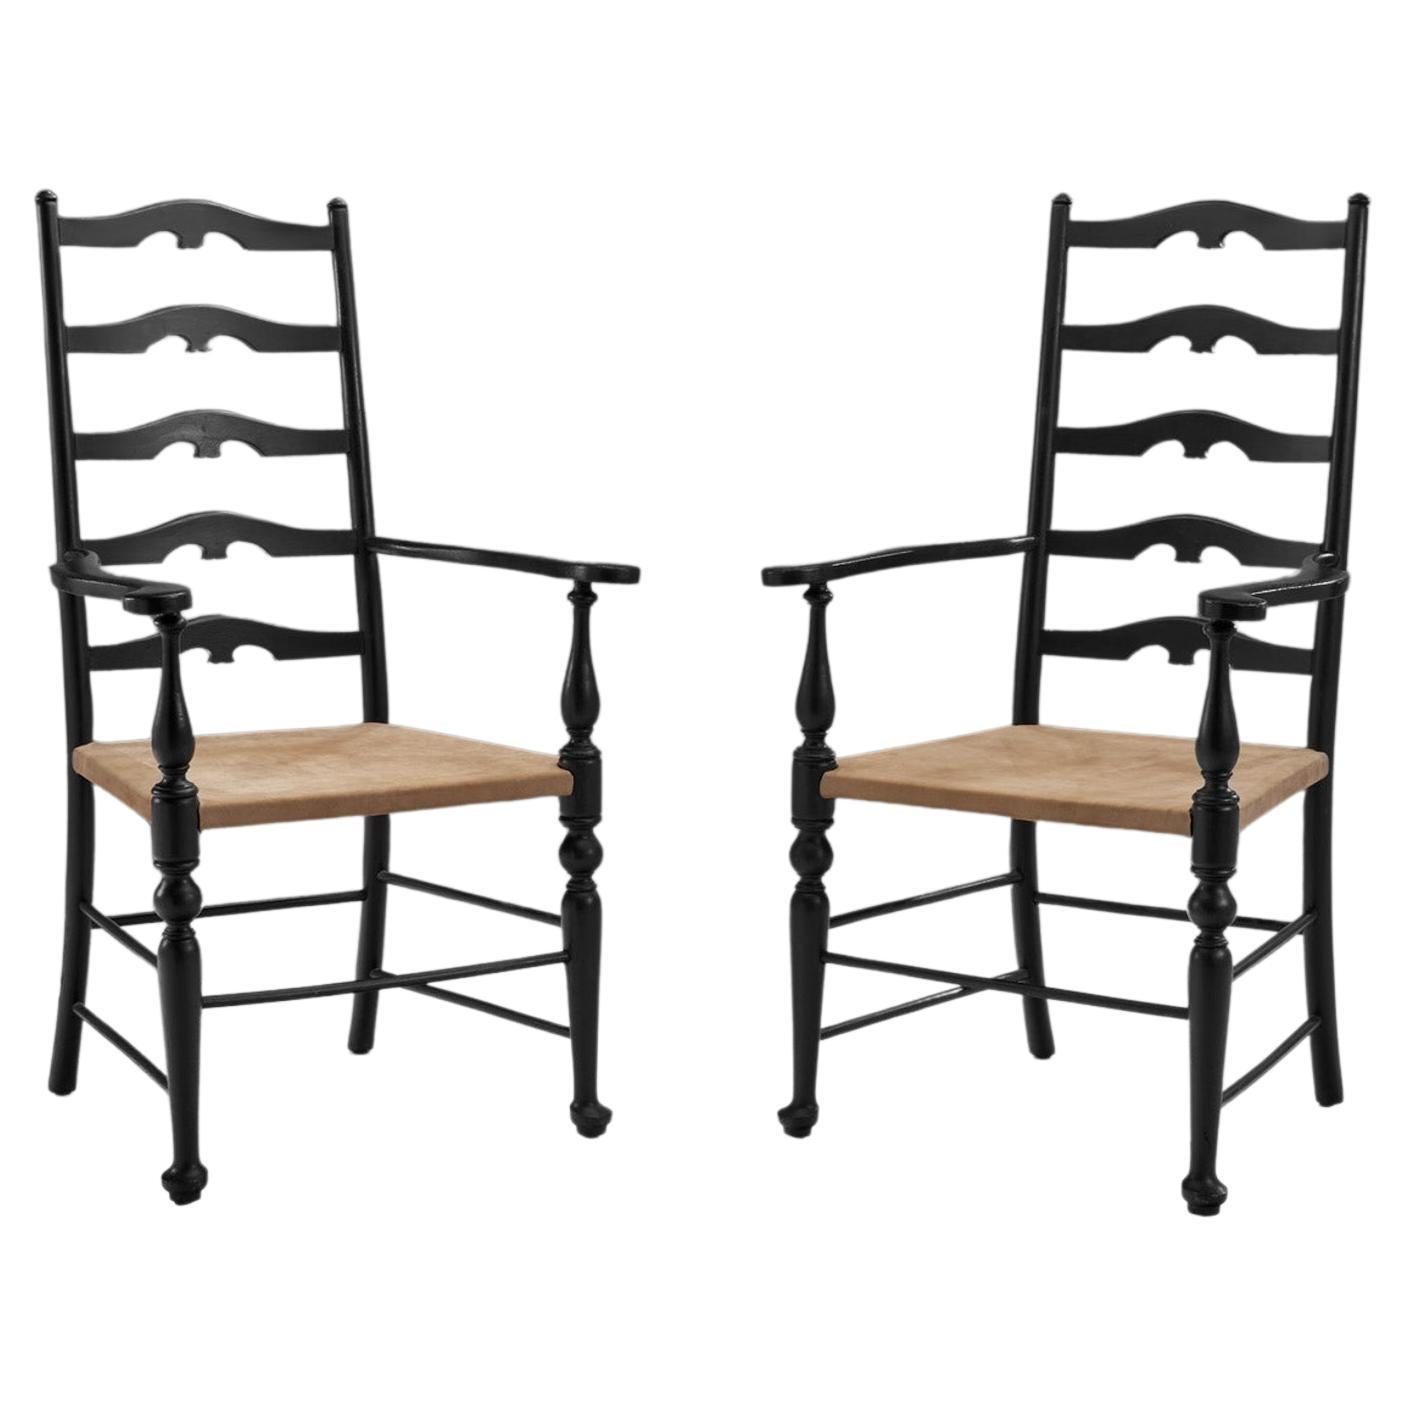 Carver Ladderback Chairs with Leather Seats, Europe Early 20th Century For Sale